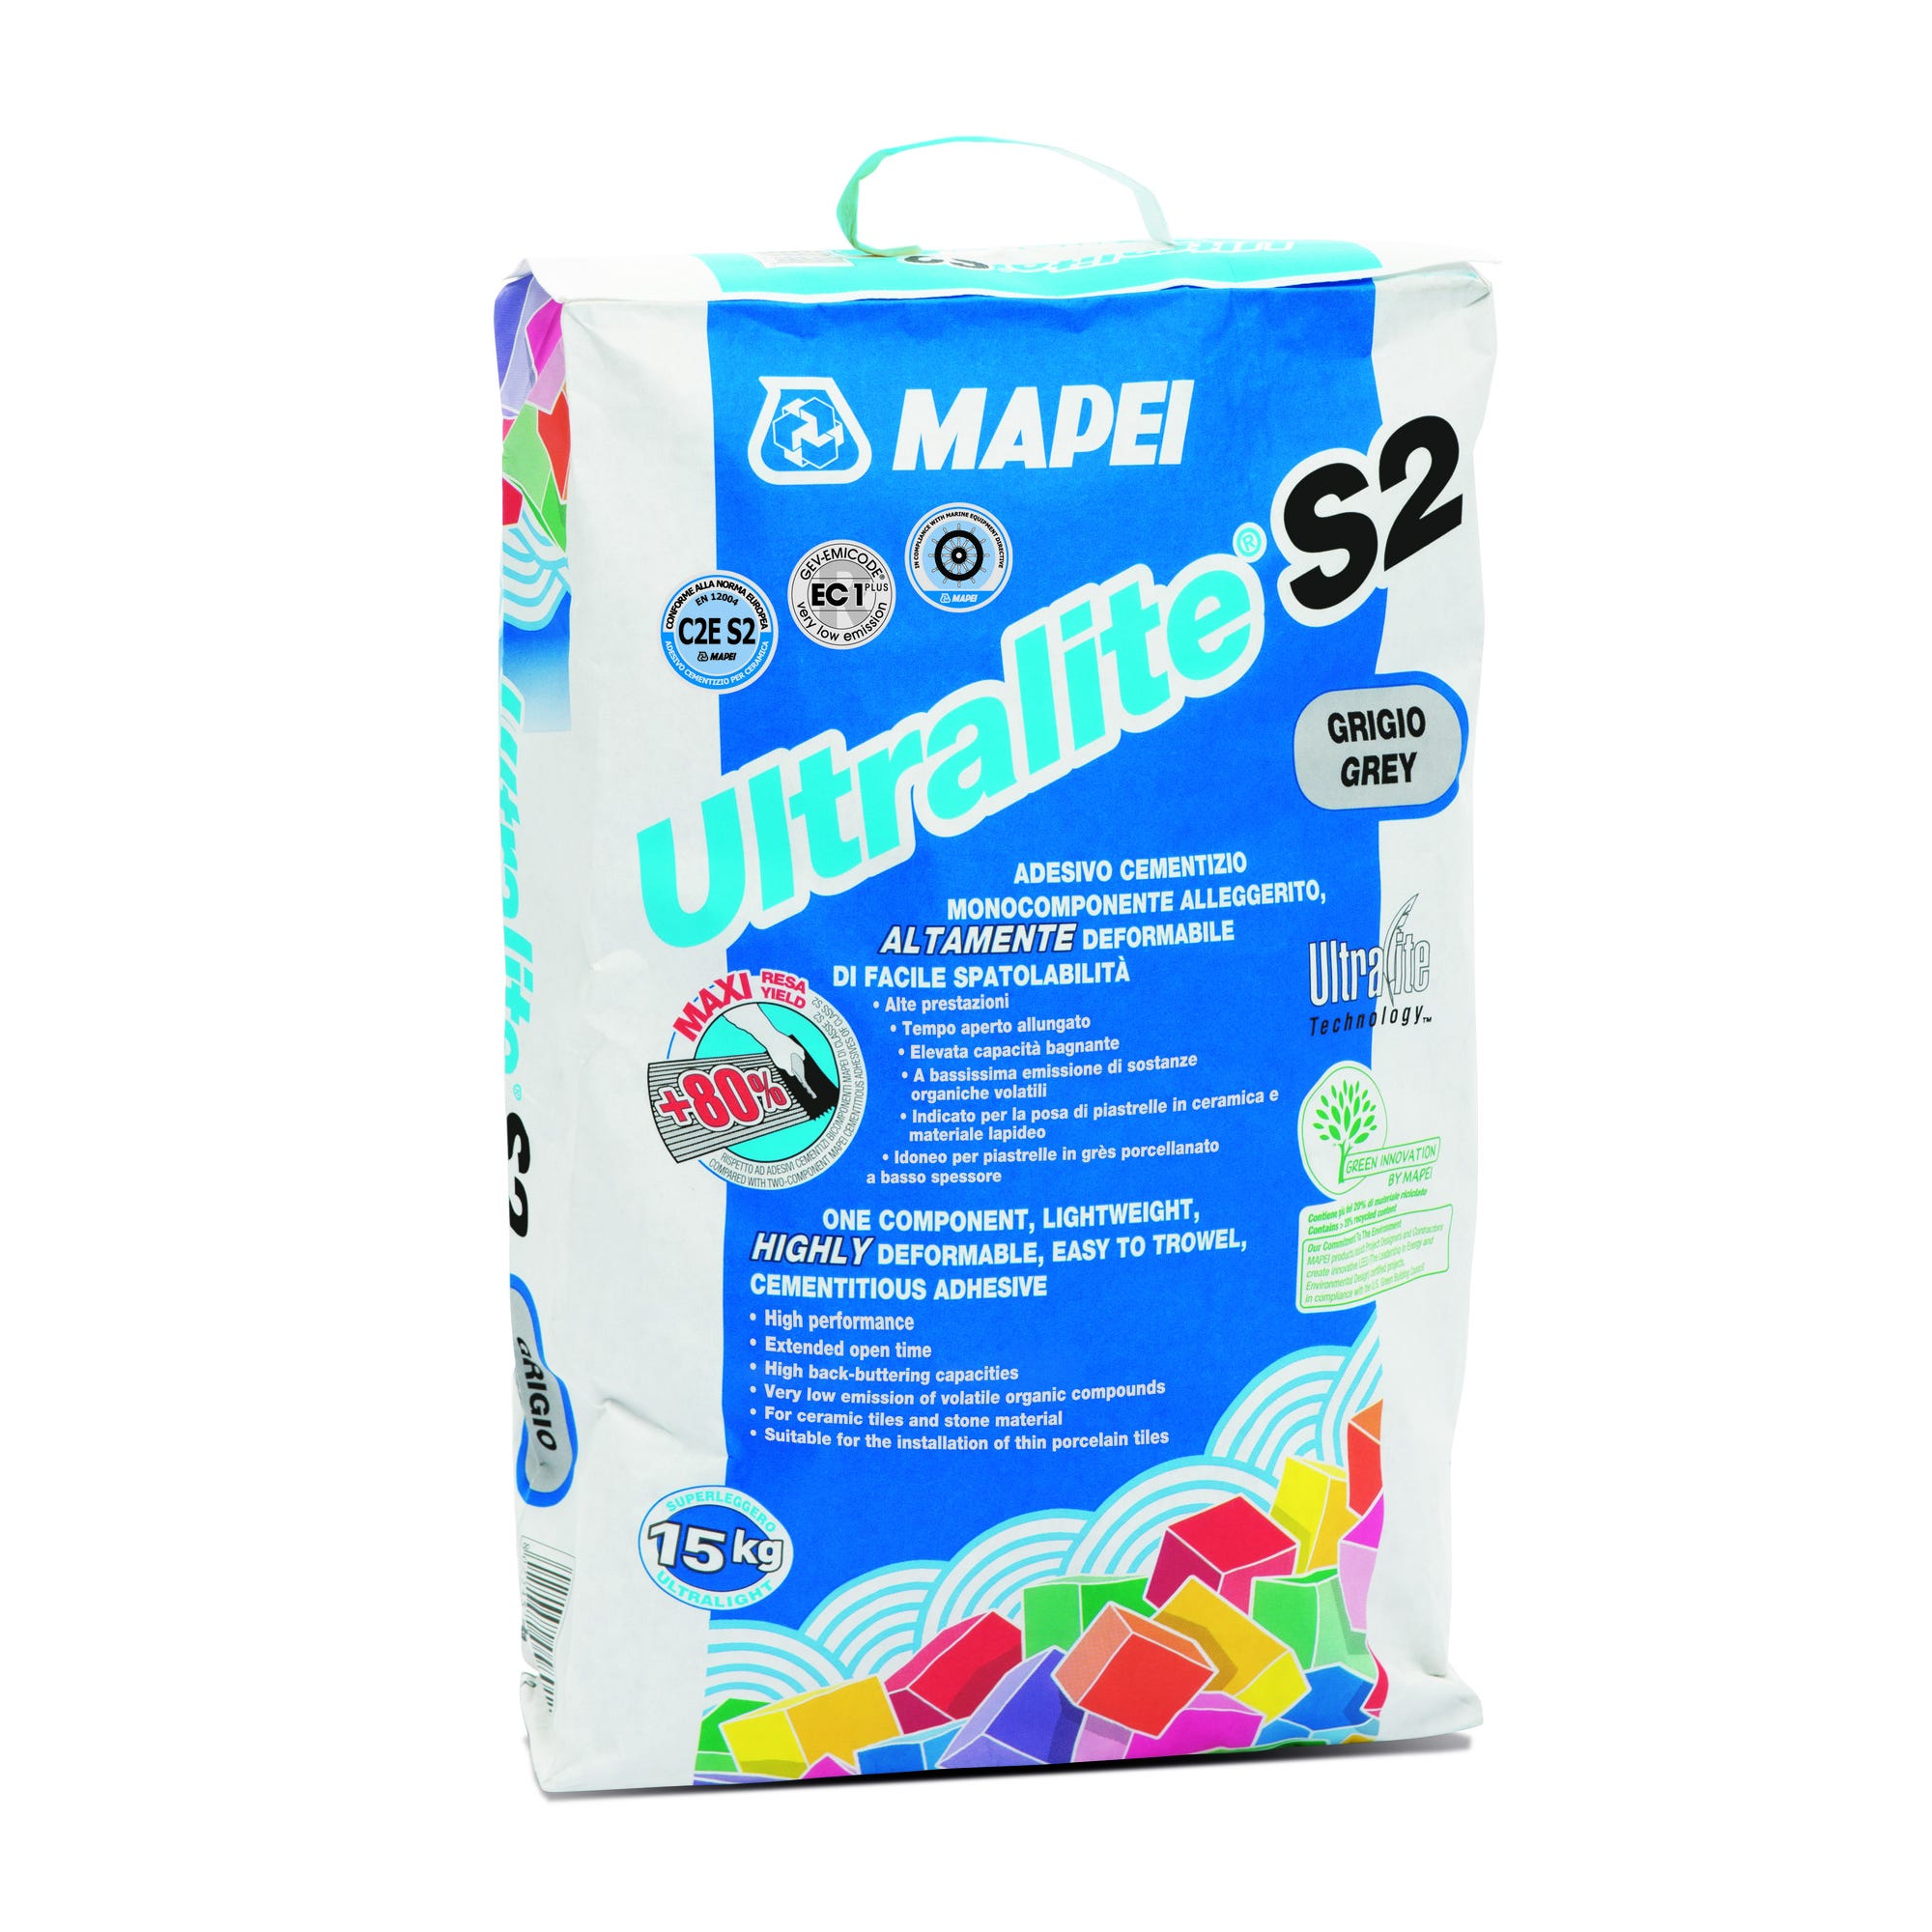 Mortier colle carrelage gris 15 kg Ultralite S2 - MAPEI 0